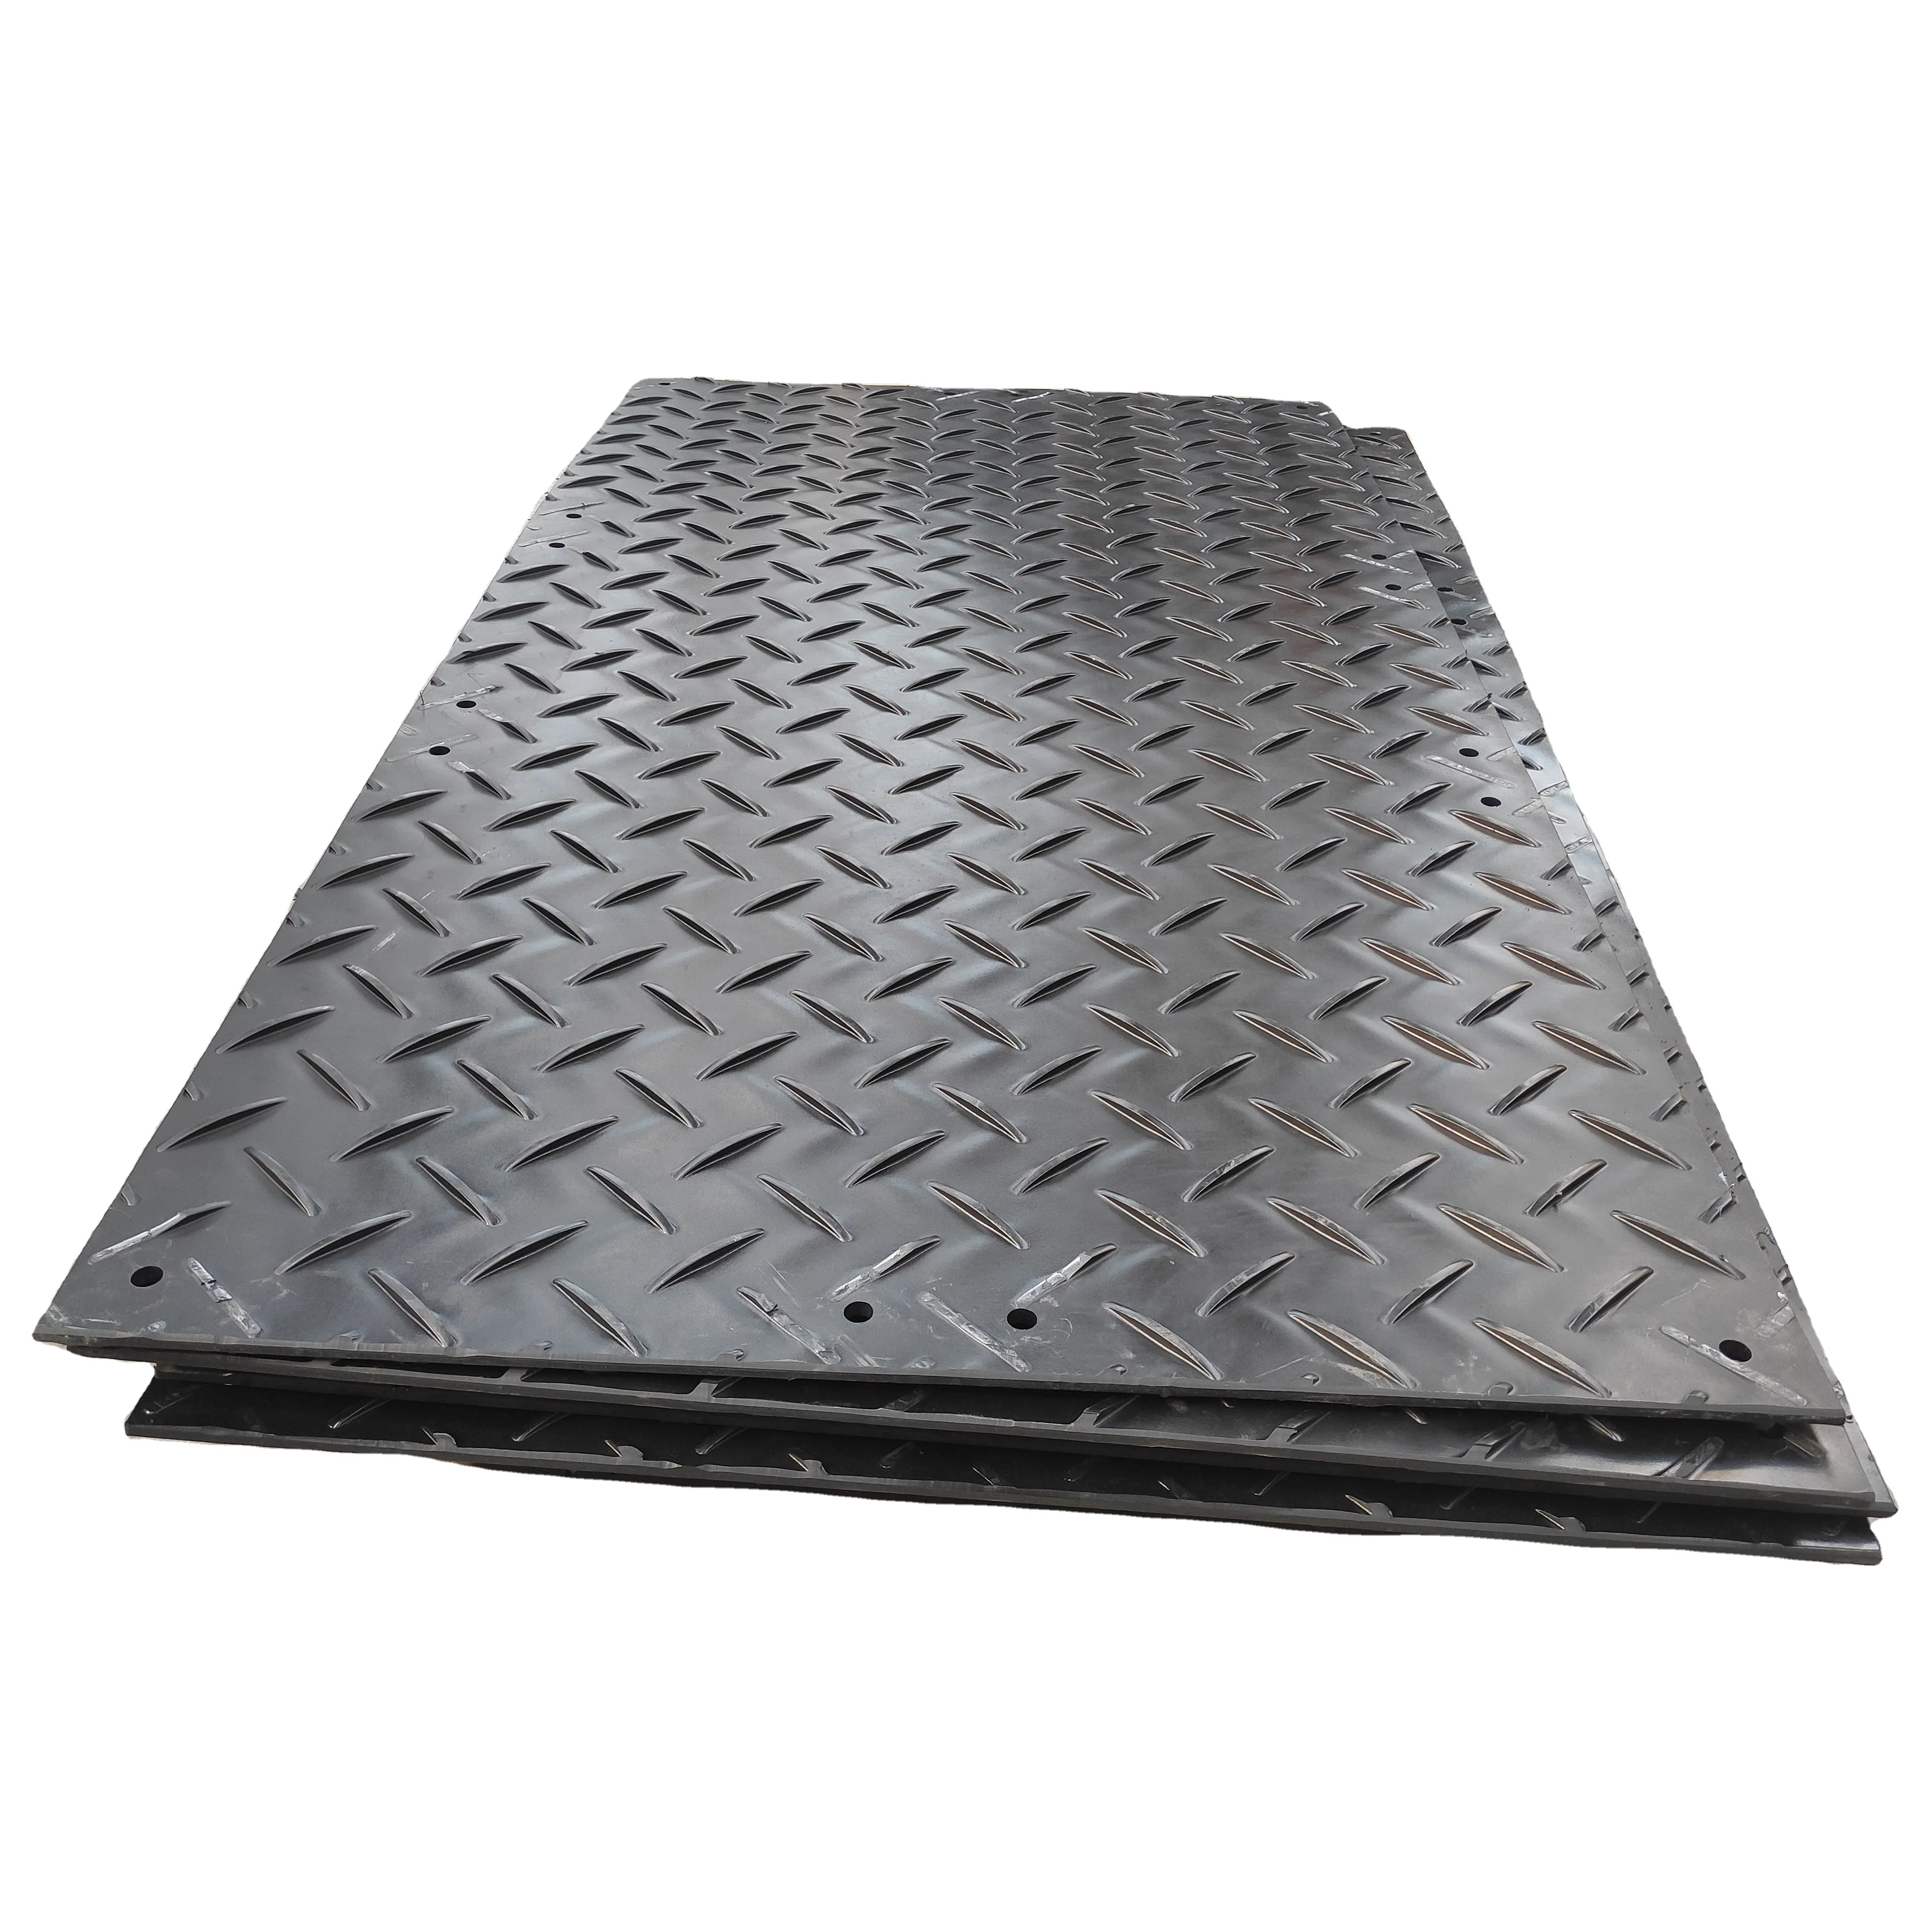 HDPE Extruded board bog mat track mat road way system durable antslip HDPE temporary road mats (1600745401691)